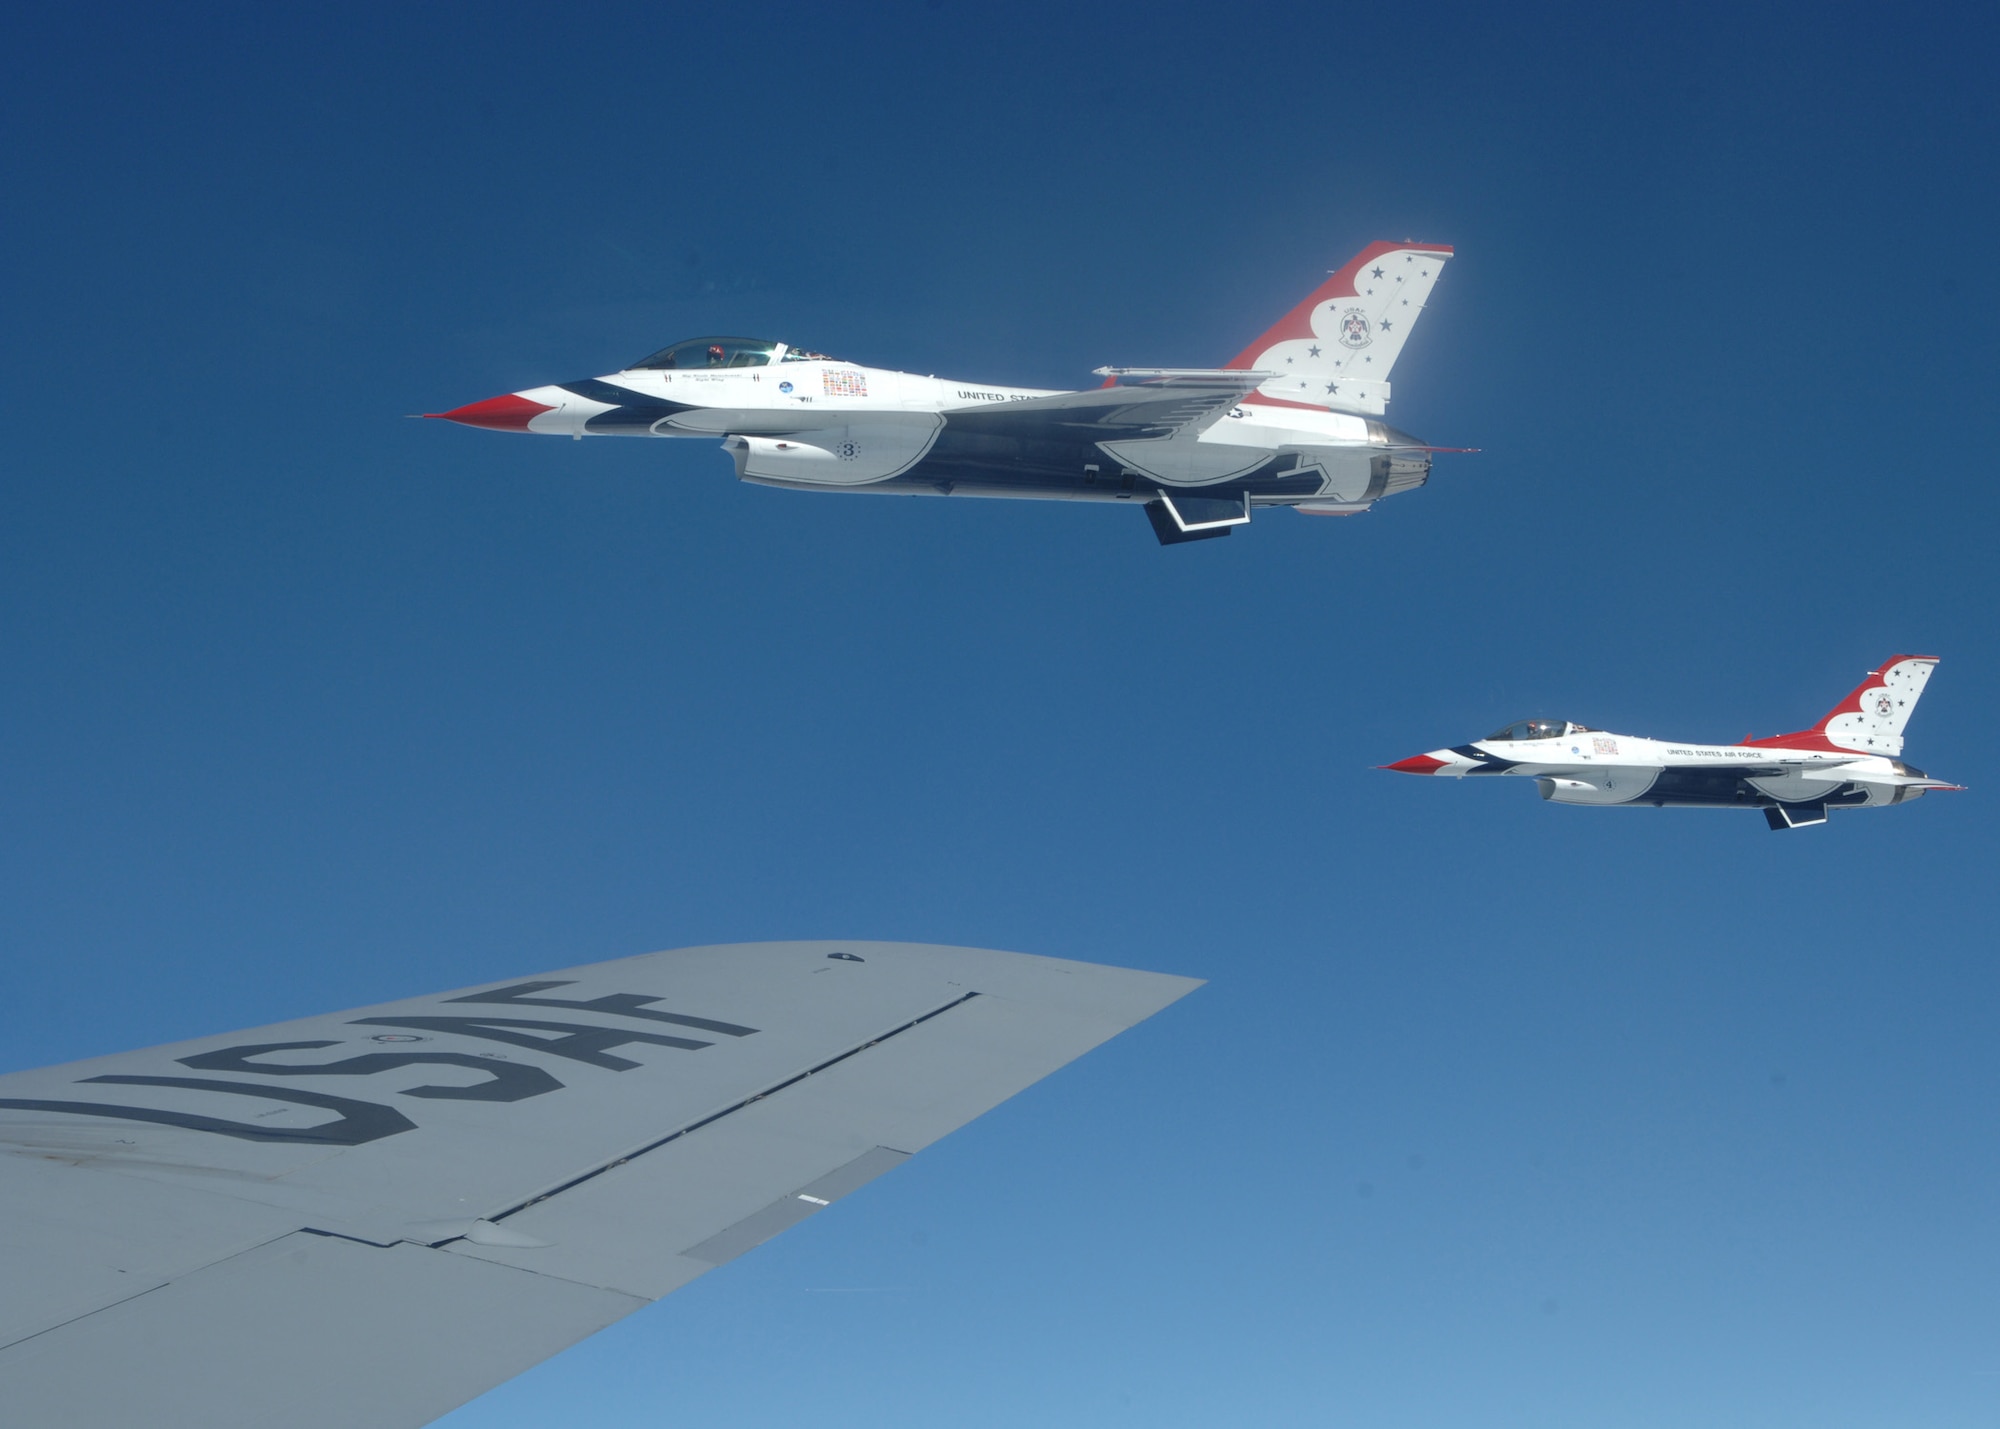 GRAND FORKS AIR FORCE BASE, N.D. ? An Air Force Thunderbird flies over the Midwestern United States during an Air Refueling mission on October 1, 2007.  (U.S. Air Force photo/Airman 1st Class Chad M. Kellum)